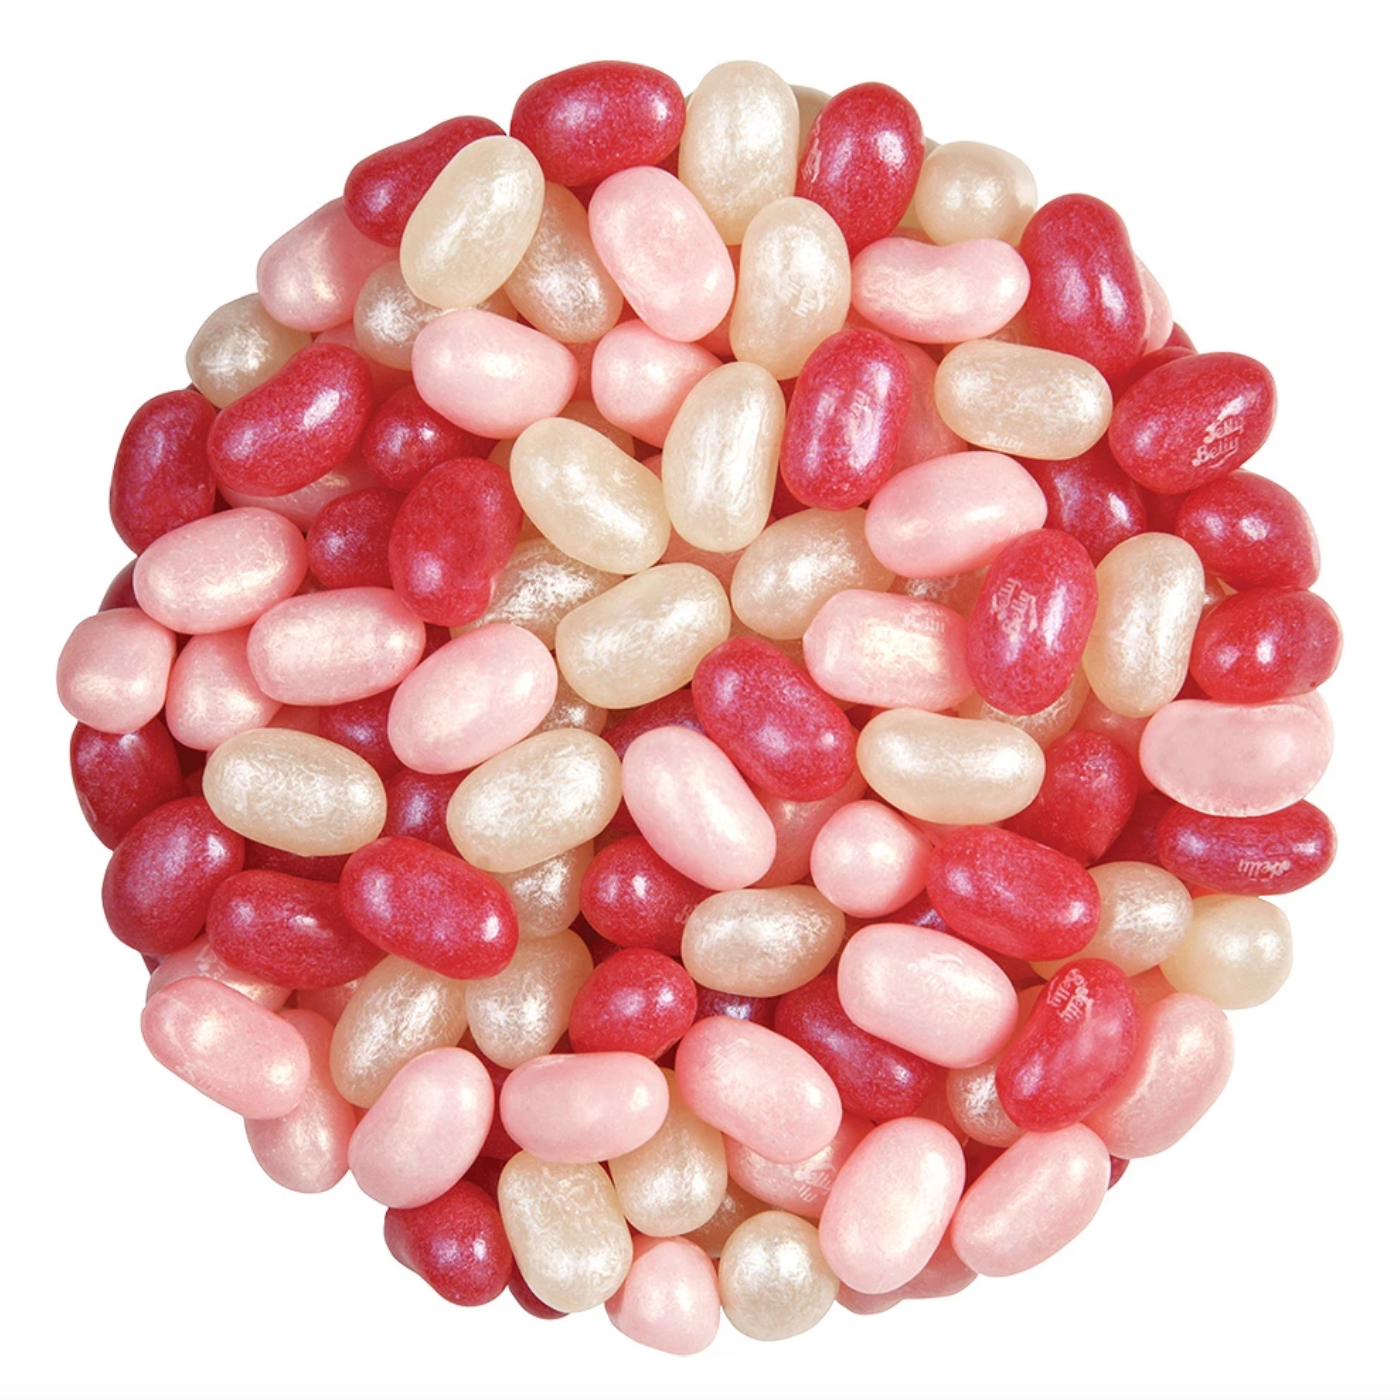 Jewel Shimmer Jelly Beans - Edelweiss Chocolates